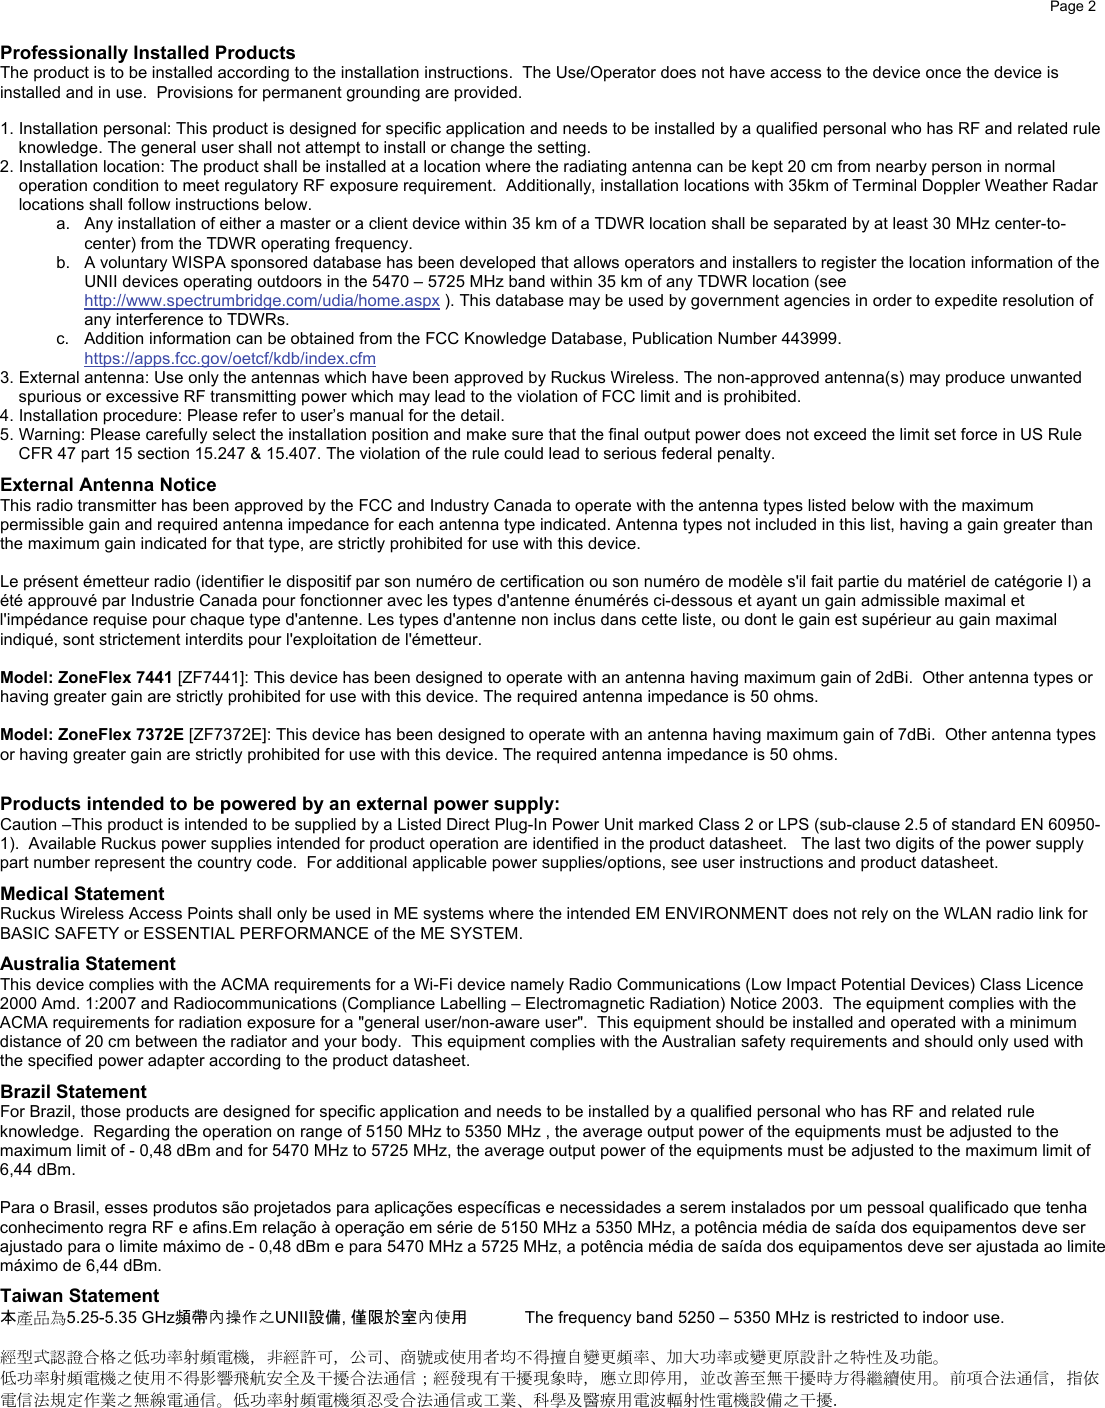    Page 2      Professionally Installed Products The product is to be installed according to the installation instructions.  The Use/Operator does not have access to the device once the device is installed and in use.  Provisions for permanent grounding are provided.  1. Installation personal: This product is designed for specific application and needs to be installed by a qualified personal who has RF and related rule knowledge. The general user shall not attempt to install or change the setting. 2. Installation location: The product shall be installed at a location where the radiating antenna can be kept 20 cm from nearby person in normal operation condition to meet regulatory RF exposure requirement.  Additionally, installation locations with 35km of Terminal Doppler Weather Radar locations shall follow instructions below. a.  Any installation of either a master or a client device within 35 km of a TDWR location shall be separated by at least 30 MHz center-to-center) from the TDWR operating frequency. b.  A voluntary WISPA sponsored database has been developed that allows operators and installers to register the location information of the UNII devices operating outdoors in the 5470 – 5725 MHz band within 35 km of any TDWR location (see http://www.spectrumbridge.com/udia/home.aspx ). This database may be used by government agencies in order to expedite resolution of any interference to TDWRs. c.  Addition information can be obtained from the FCC Knowledge Database, Publication Number 443999. https://apps.fcc.gov/oetcf/kdb/index.cfm  3. External antenna: Use only the antennas which have been approved by Ruckus Wireless. The non-approved antenna(s) may produce unwanted spurious or excessive RF transmitting power which may lead to the violation of FCC limit and is prohibited.  4. Installation procedure: Please refer to user’s manual for the detail. 5. Warning: Please carefully select the installation position and make sure that the final output power does not exceed the limit set force in US Rule CFR 47 part 15 section 15.247 &amp; 15.407. The violation of the rule could lead to serious federal penalty. External Antenna Notice This radio transmitter has been approved by the FCC and Industry Canada to operate with the antenna types listed below with the maximum permissible gain and required antenna impedance for each antenna type indicated. Antenna types not included in this list, having a gain greater than the maximum gain indicated for that type, are strictly prohibited for use with this device.   Le présent émetteur radio (identifier le dispositif par son numéro de certification ou son numéro de modèle s&apos;il fait partie du matériel de catégorie I) a été approuvé par Industrie Canada pour fonctionner avec les types d&apos;antenne énumérés ci-dessous et ayant un gain admissible maximal et  l&apos;impédance requise pour chaque type d&apos;antenne. Les types d&apos;antenne non inclus dans cette liste, ou dont le gain est supérieur au gain maximal indiqué, sont strictement interdits pour l&apos;exploitation de l&apos;émetteur.   Model: ZoneFlex 7441 [ZF7441]: This device has been designed to operate with an antenna having maximum gain of 2dBi.  Other antenna types or having greater gain are strictly prohibited for use with this device. The required antenna impedance is 50 ohms.  Model: ZoneFlex 7372E [ZF7372E]: This device has been designed to operate with an antenna having maximum gain of 7dBi.  Other antenna types or having greater gain are strictly prohibited for use with this device. The required antenna impedance is 50 ohms.  Products intended to be powered by an external power supply: Caution –This product is intended to be supplied by a Listed Direct Plug-In Power Unit marked Class 2 or LPS (sub-clause 2.5 of standard EN 60950-1).  Available Ruckus power supplies intended for product operation are identified in the product datasheet.   The last two digits of the power supply part number represent the country code.  For additional applicable power supplies/options, see user instructions and product datasheet. Medical Statement Ruckus Wireless Access Points shall only be used in ME systems where the intended EM ENVIRONMENT does not rely on the WLAN radio link for BASIC SAFETY or ESSENTIAL PERFORMANCE of the ME SYSTEM. Australia Statement This device complies with the ACMA requirements for a Wi-Fi device namely Radio Communications (Low Impact Potential Devices) Class Licence 2000 Amd. 1:2007 and Radiocommunications (Compliance Labelling – Electromagnetic Radiation) Notice 2003.  The equipment complies with the ACMA requirements for radiation exposure for a &quot;general user/non-aware user&quot;.  This equipment should be installed and operated with a minimum distance of 20 cm between the radiator and your body.  This equipment complies with the Australian safety requirements and should only used with the specified power adapter according to the product datasheet. Brazil Statement For Brazil, those products are designed for specific application and needs to be installed by a qualified personal who has RF and related rule knowledge.  Regarding the operation on range of 5150 MHz to 5350 MHz , the average output power of the equipments must be adjusted to the maximum limit of - 0,48 dBm and for 5470 MHz to 5725 MHz, the average output power of the equipments must be adjusted to the maximum limit of 6,44 dBm.  Para o Brasil, esses produtos são projetados para aplicações específicas e necessidades a serem instalados por um pessoal qualificado que tenha conhecimento regra RF e afins.Em relação à operação em série de 5150 MHz a 5350 MHz, a potência média de saída dos equipamentos deve ser ajustado para o limite máximo de - 0,48 dBm e para 5470 MHz a 5725 MHz, a potência média de saída dos equipamentos deve ser ajustada ao limite máximo de 6,44 dBm. Taiwan Statement 本產品為5.25-5.35 GHz頻帶內操作之UNII設備, 僅限於室內使用  The frequency band 5250 – 5350 MHz is restricted to indoor use.    經型式認證合格之低功率射頻電機，非經許可，公司、商號或使用者均不得擅自變更頻率、加大功率或變更原設計之特性及功能。  低功率射頻電機之使用不得影響飛航安全及干擾合法通信；經發現有干擾現象時，應立即停用，並改善至無干擾時方得繼續使用。前項合法通信，指依電信法規定作業之無線電通信。低功率射頻電機須忍受合法通信或工業、科學及醫療用電波輻射性電機設備之干擾.    